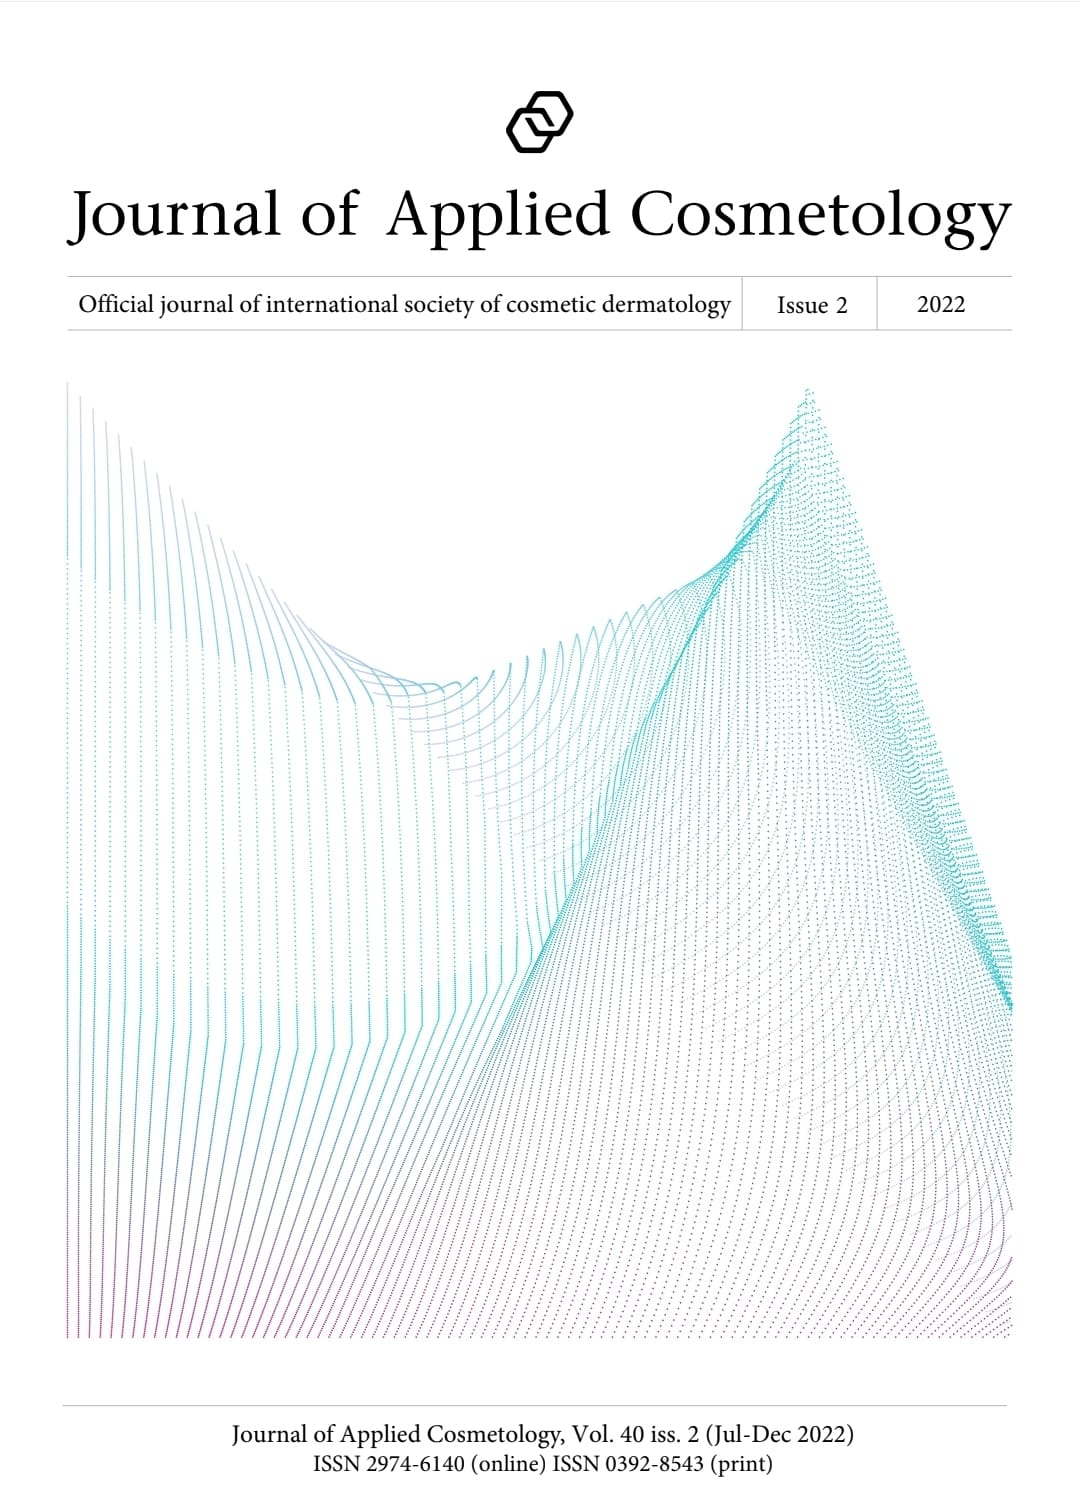 					View Vol. 40 No. 2 (2022): Journal of Applied Cosmetology 
				